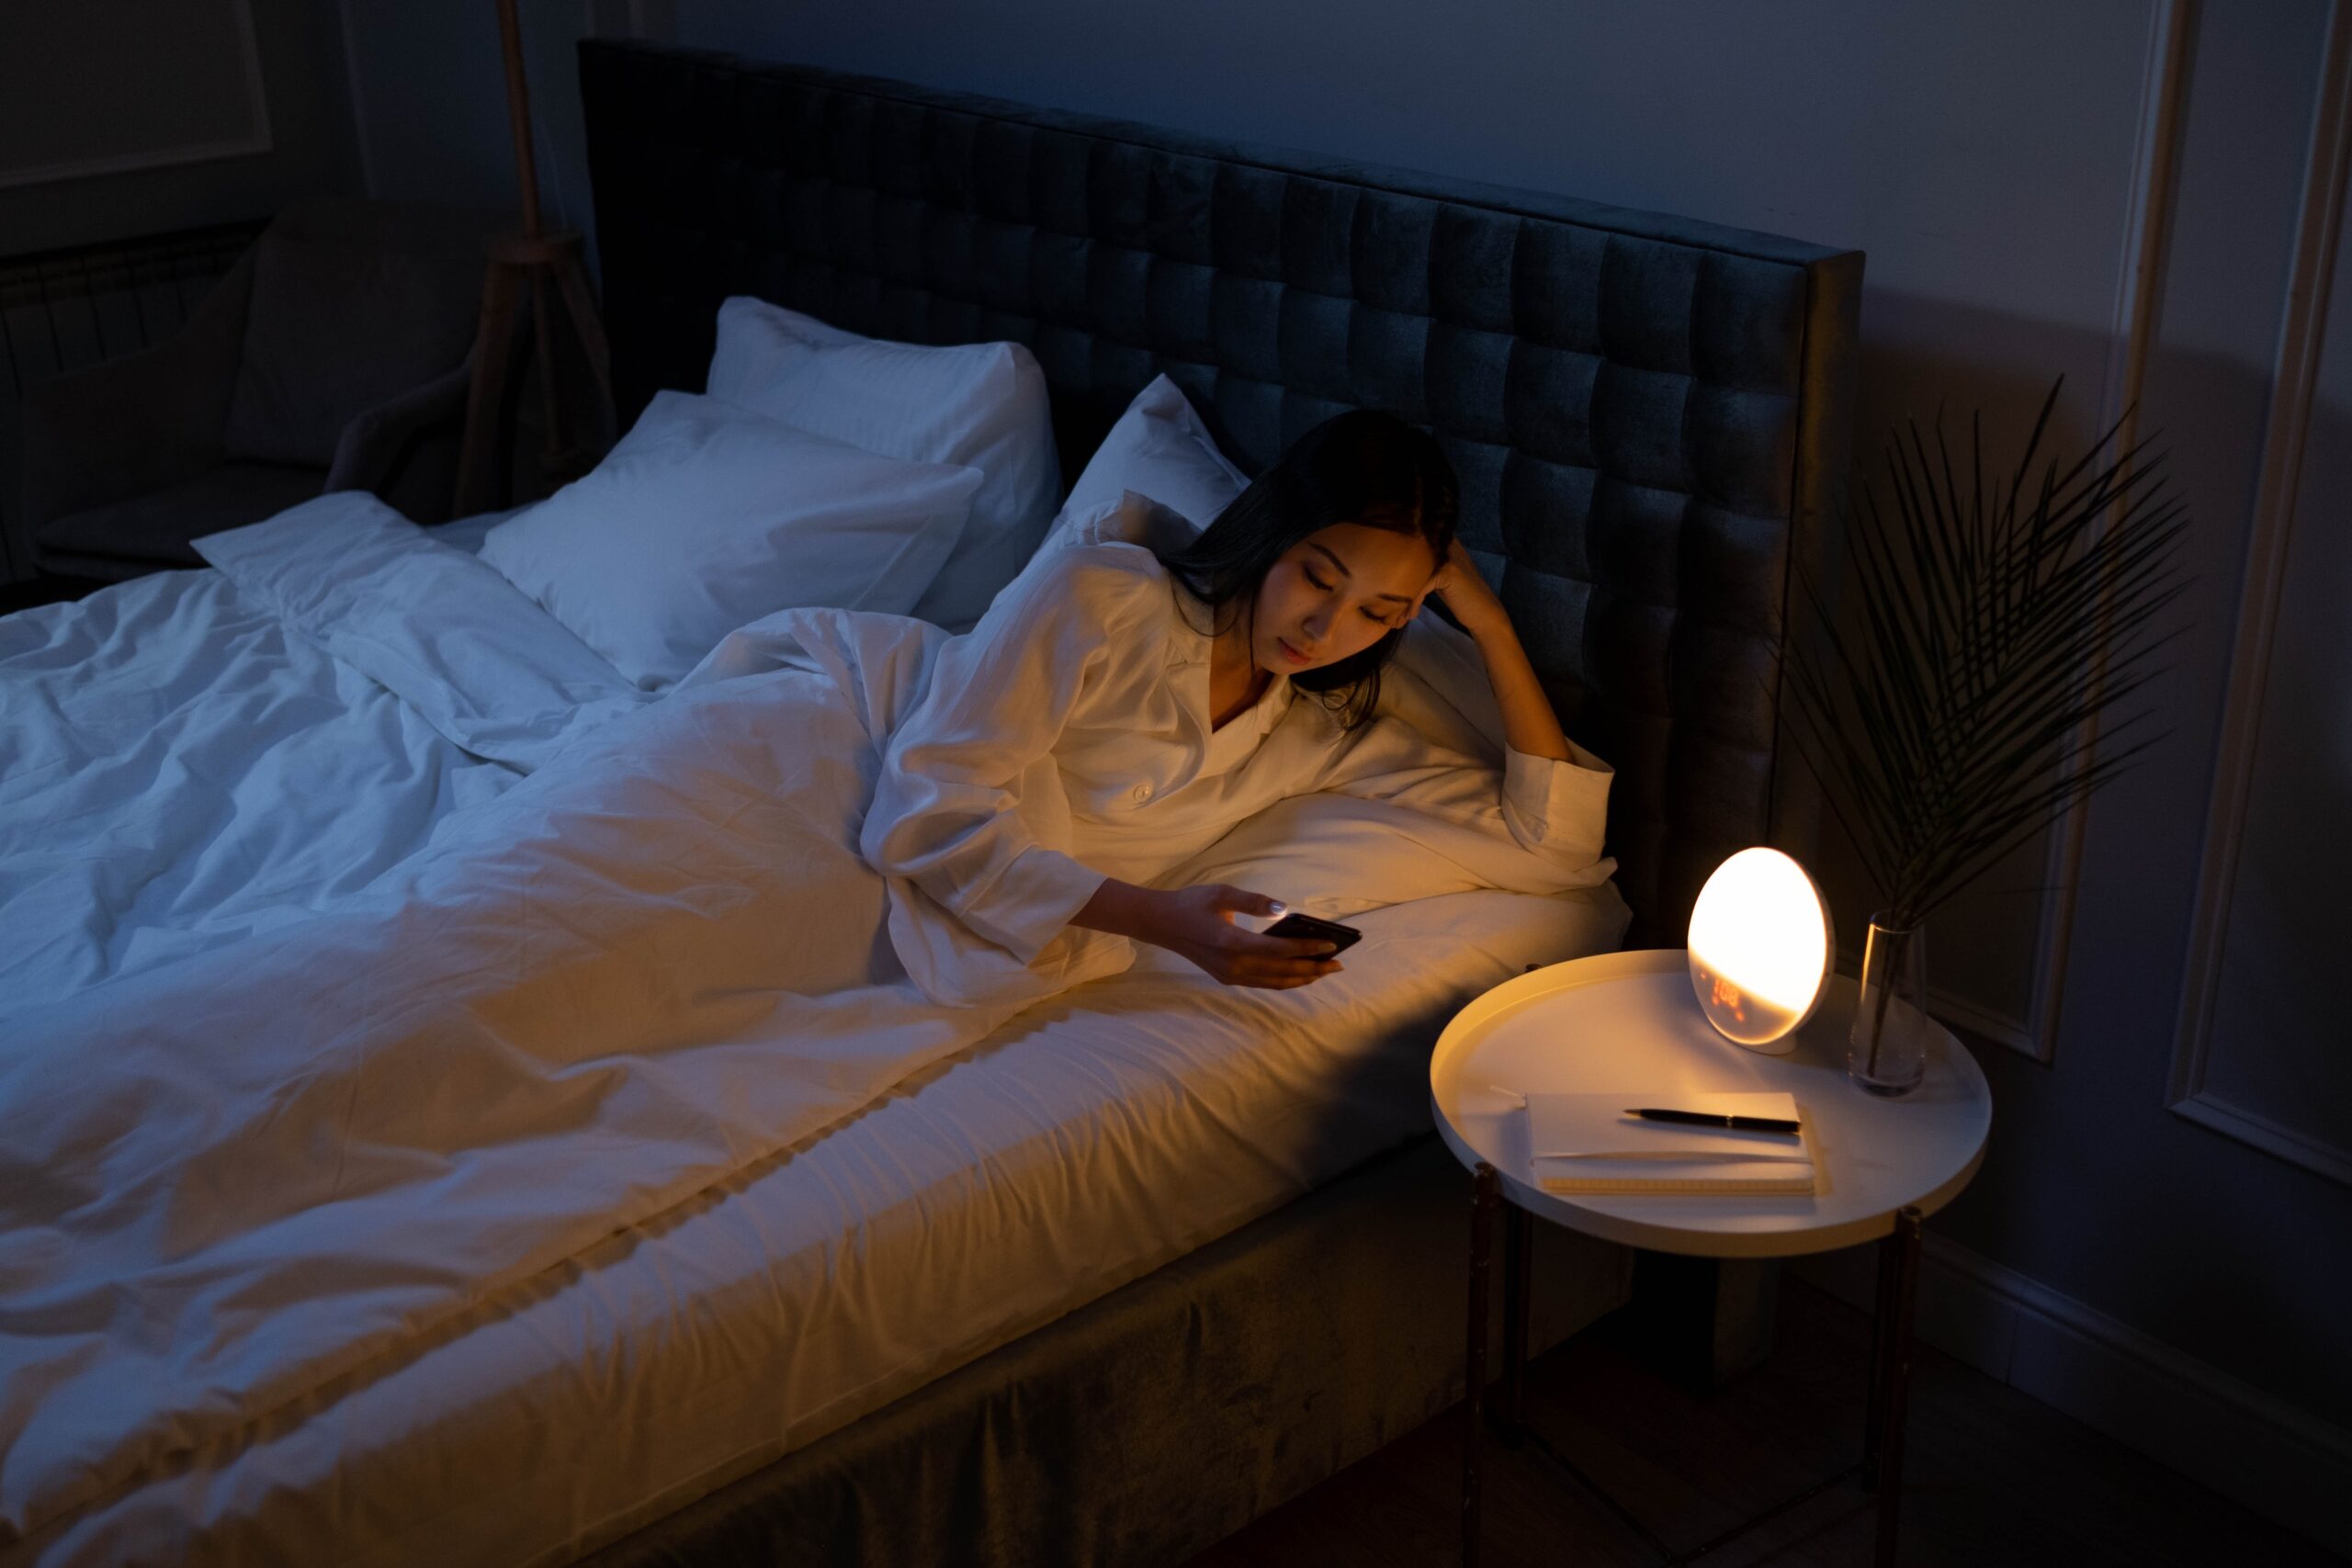 How to Treat Insomnia as an Indication Not Chaos